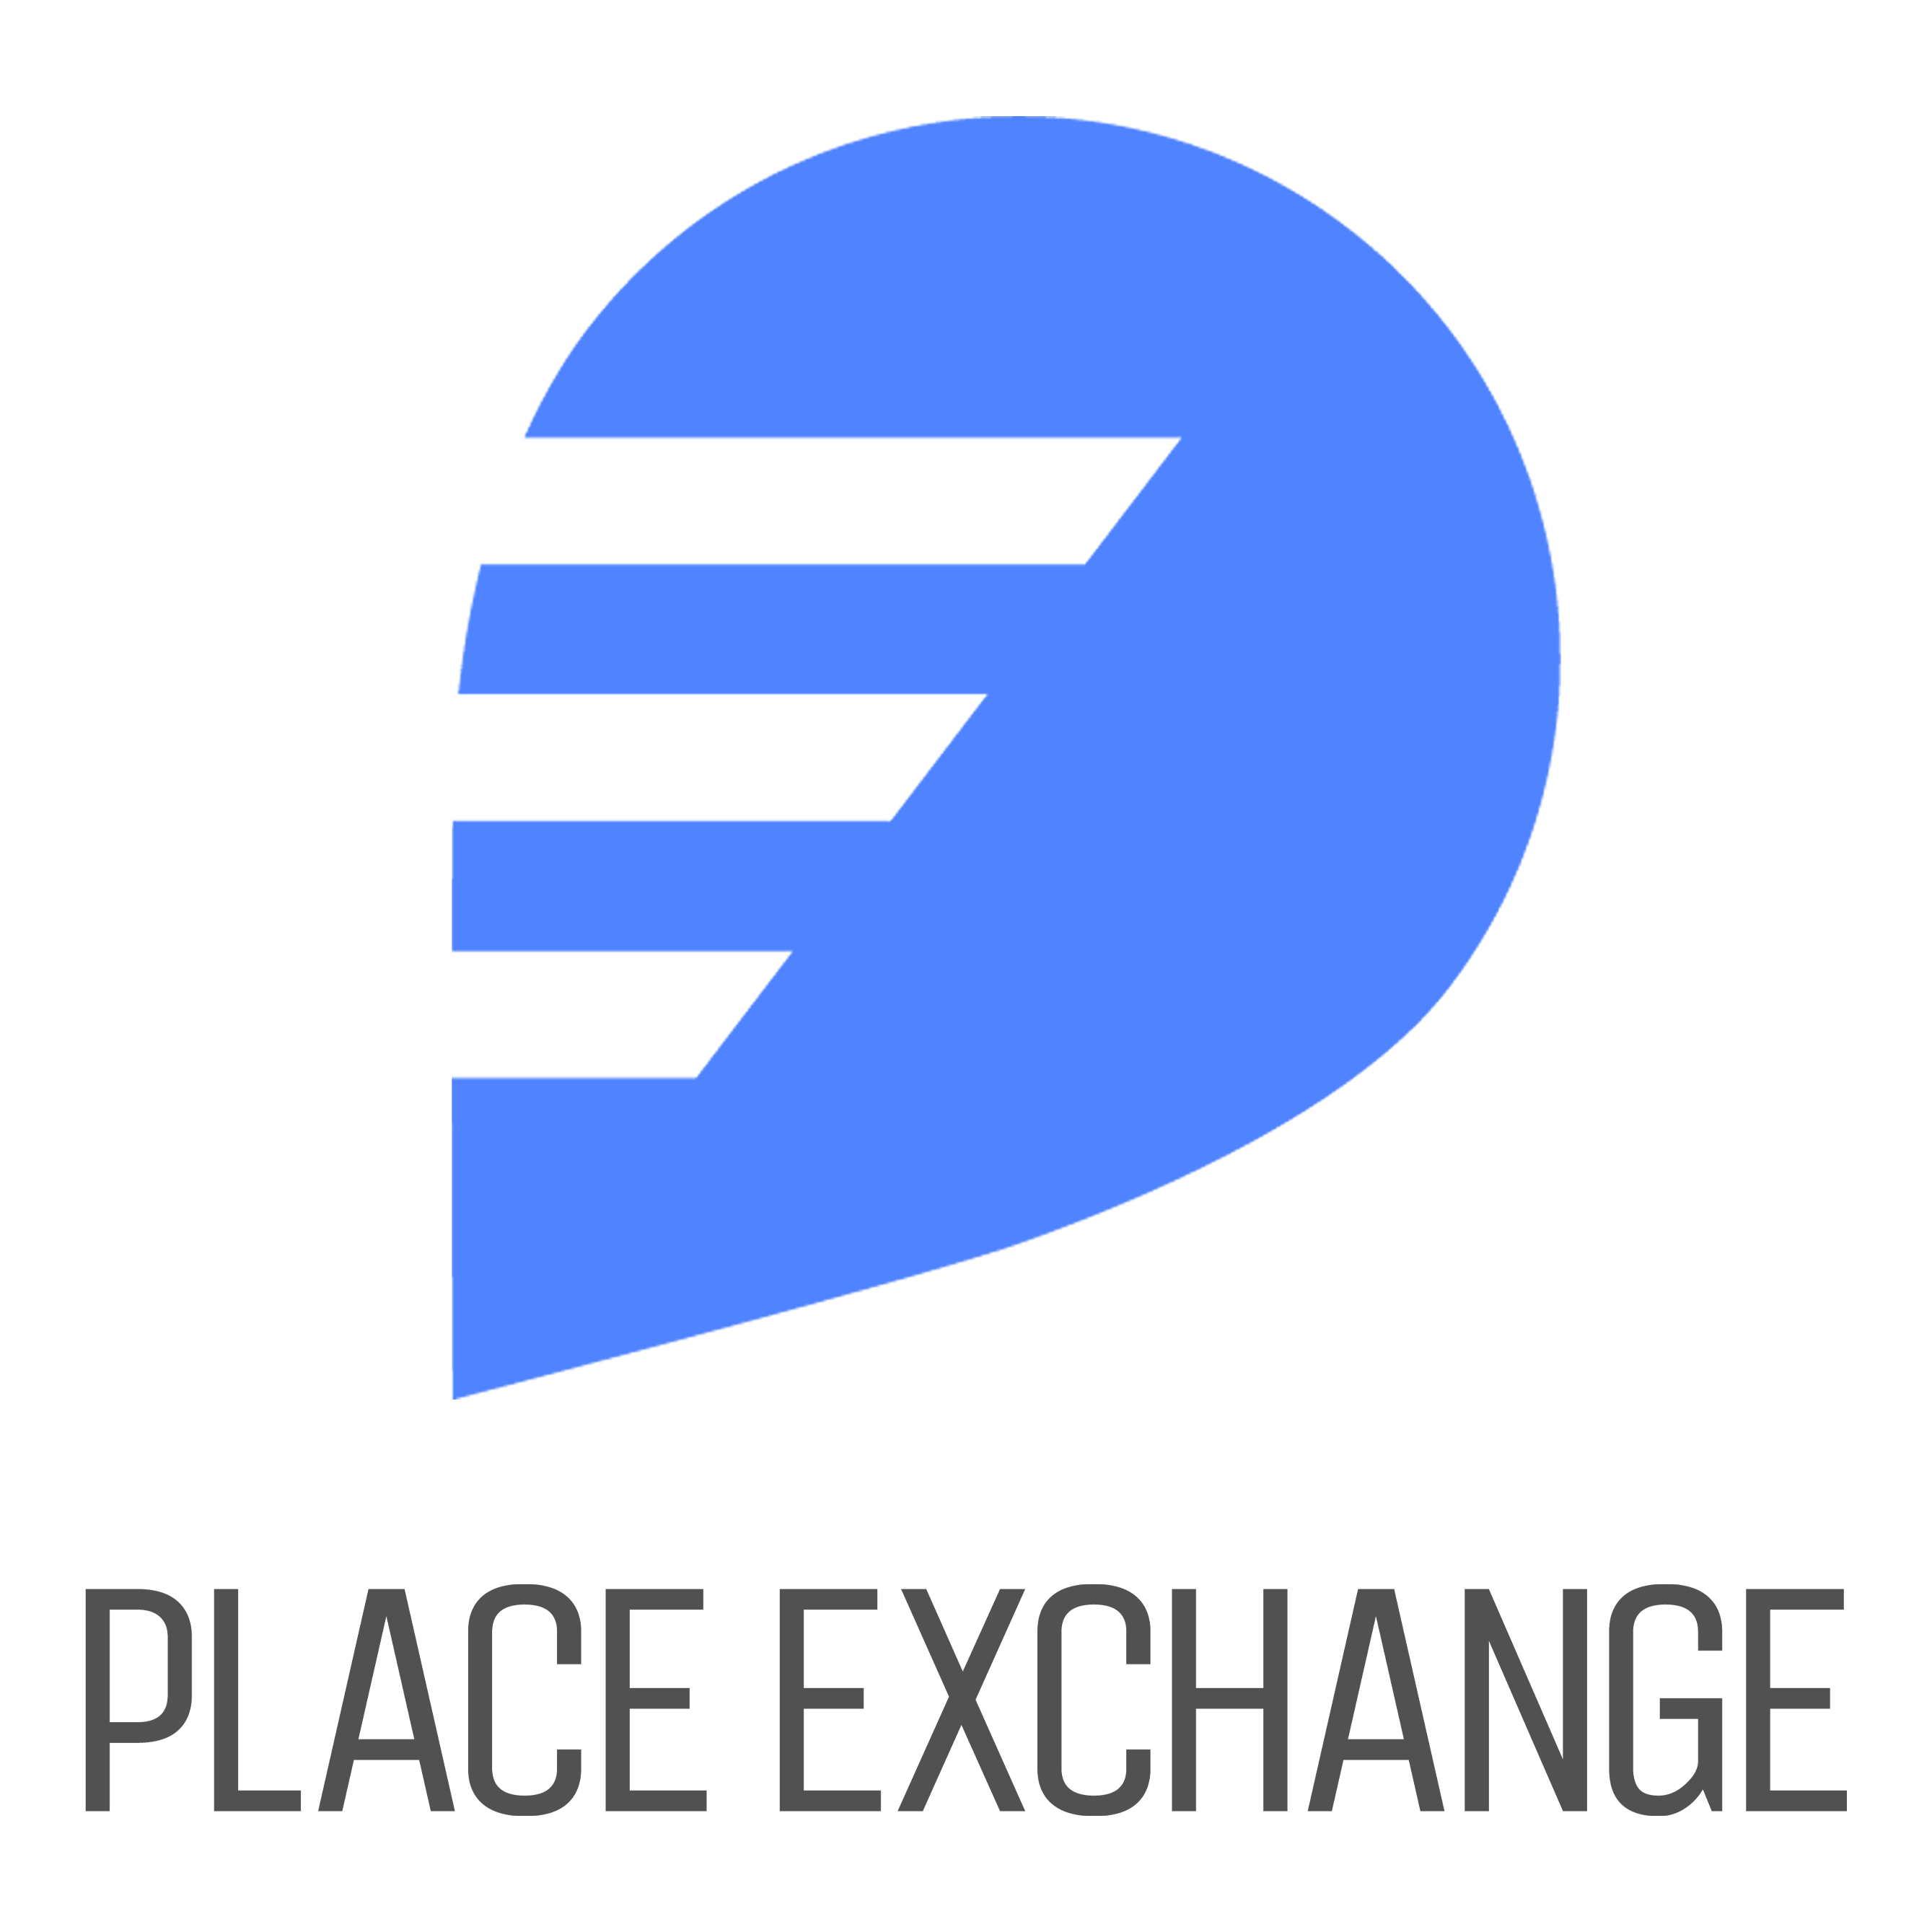 Place Exchange